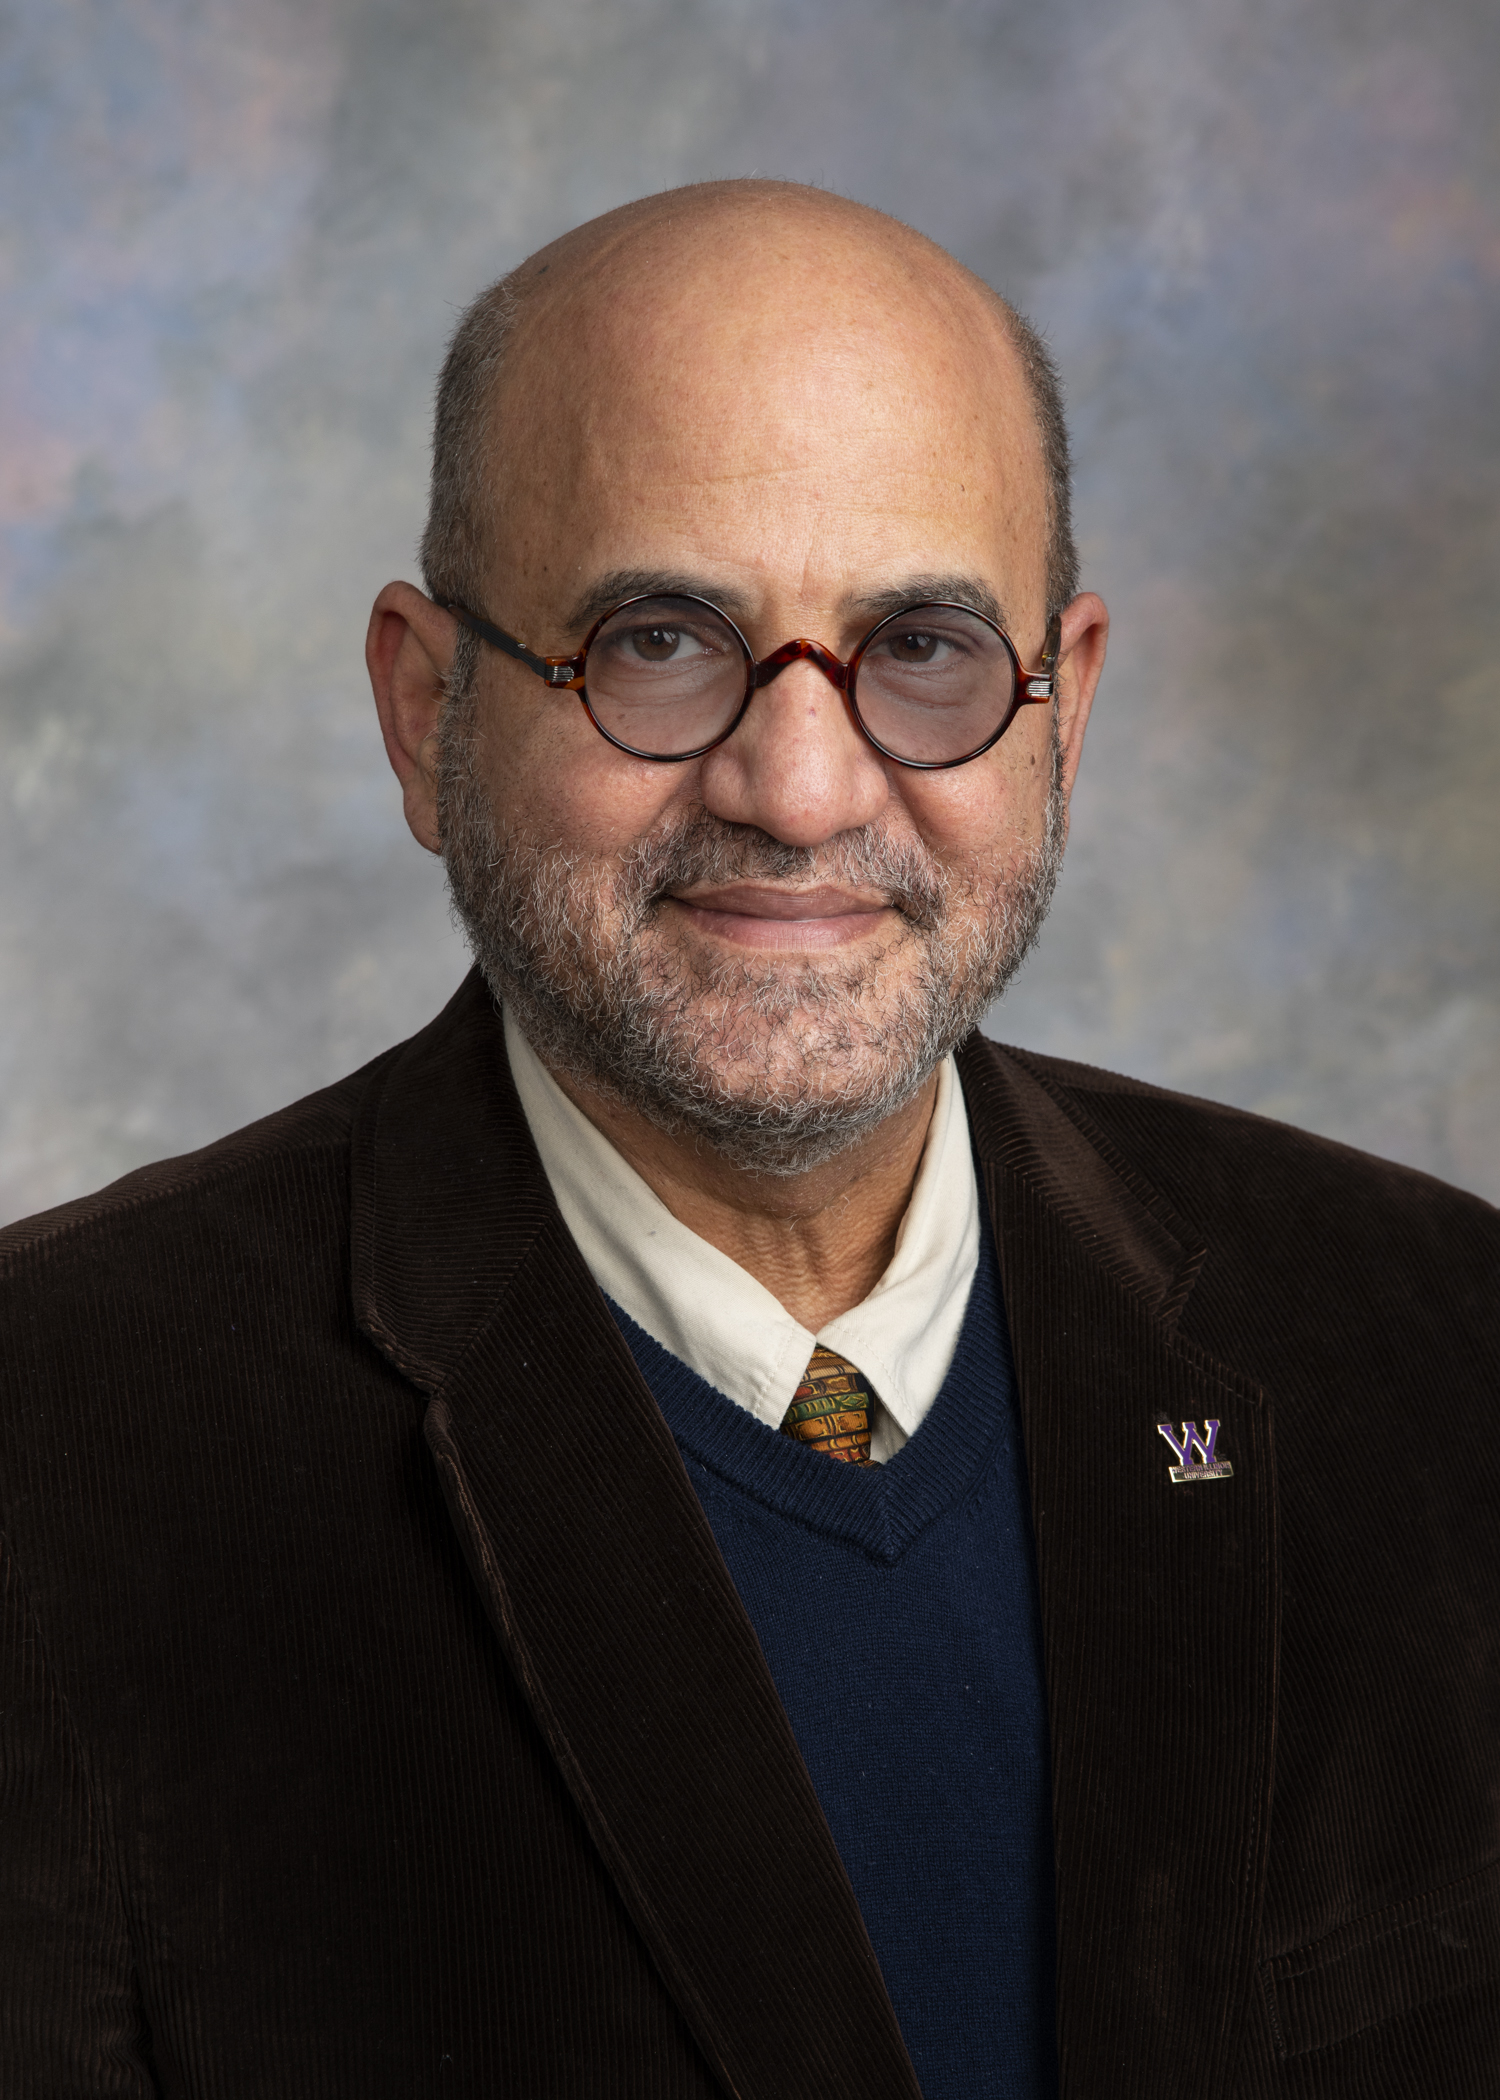 Photograph of Dr. Hector J. Maymi-Sugranes